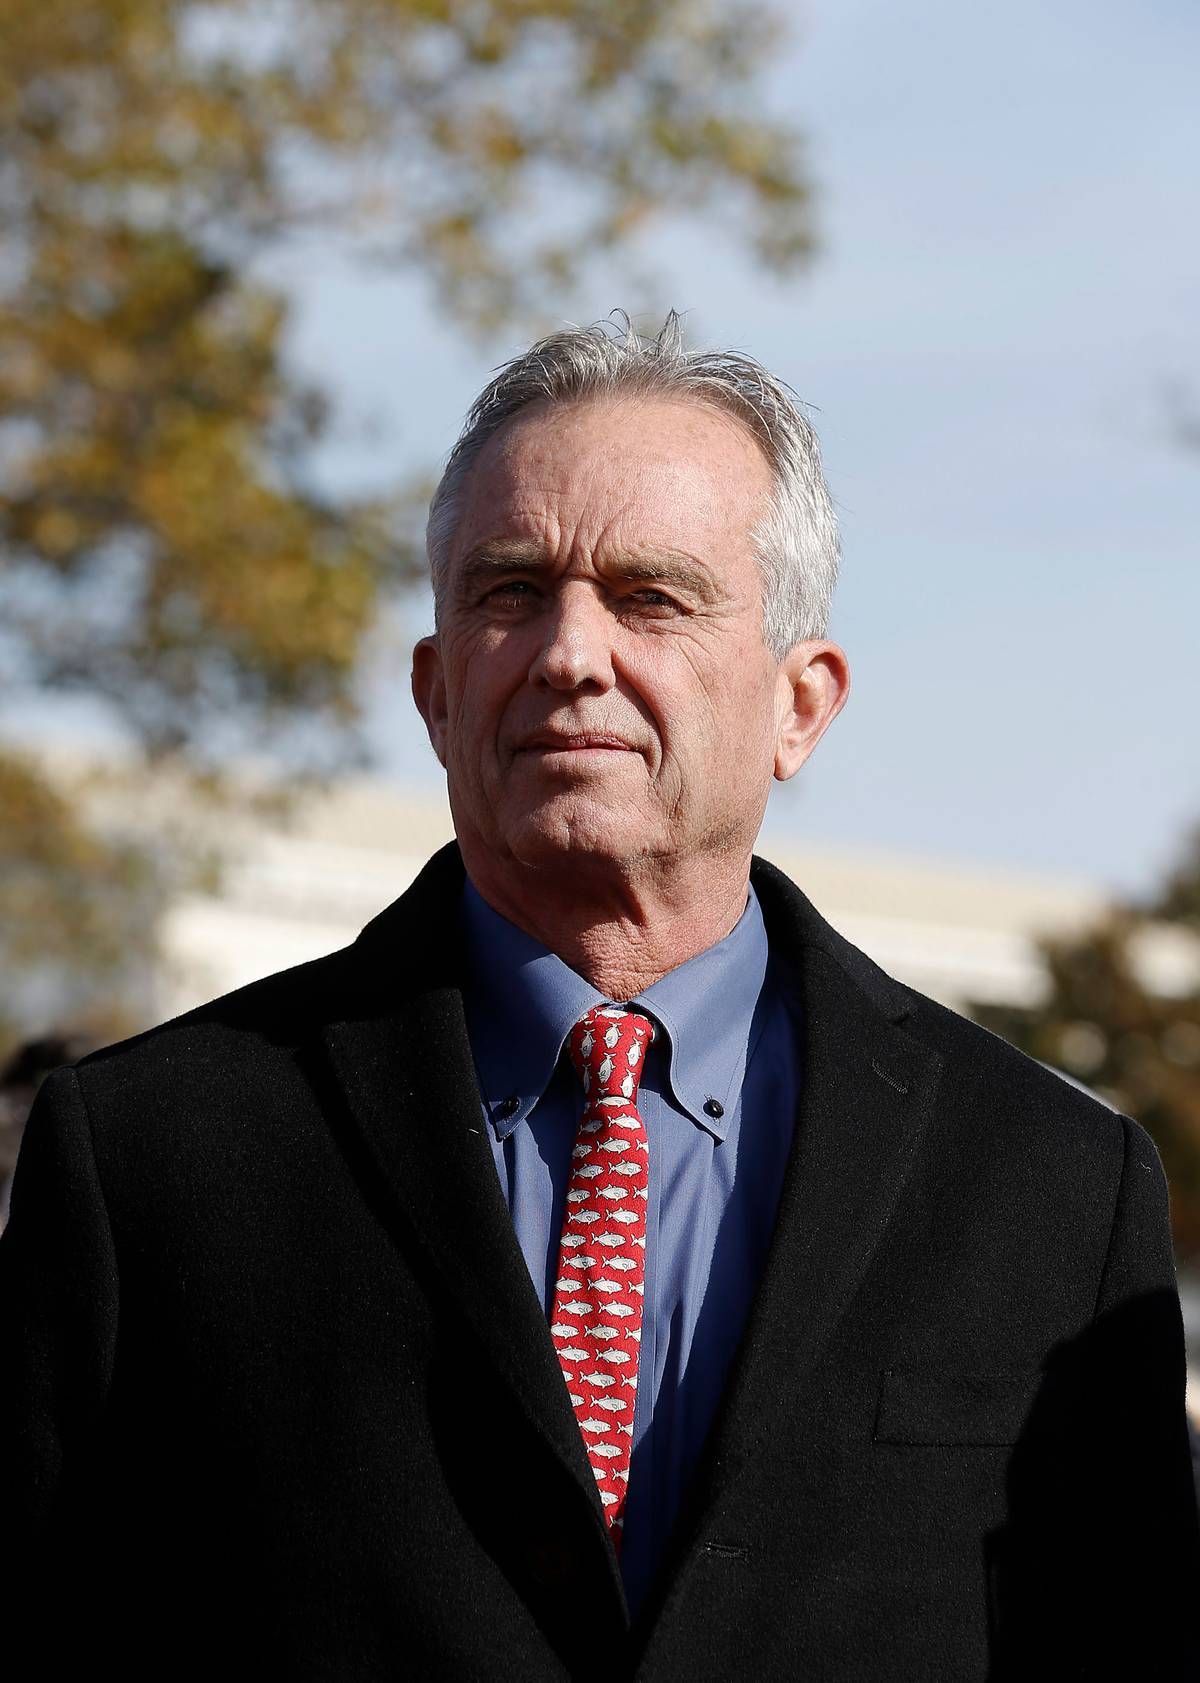 Robert Kennedy Jr. demonstrates during the ‘Fire Drill Friday’ climate change protest in Washington, D.C., on Nov. 15, 2019 